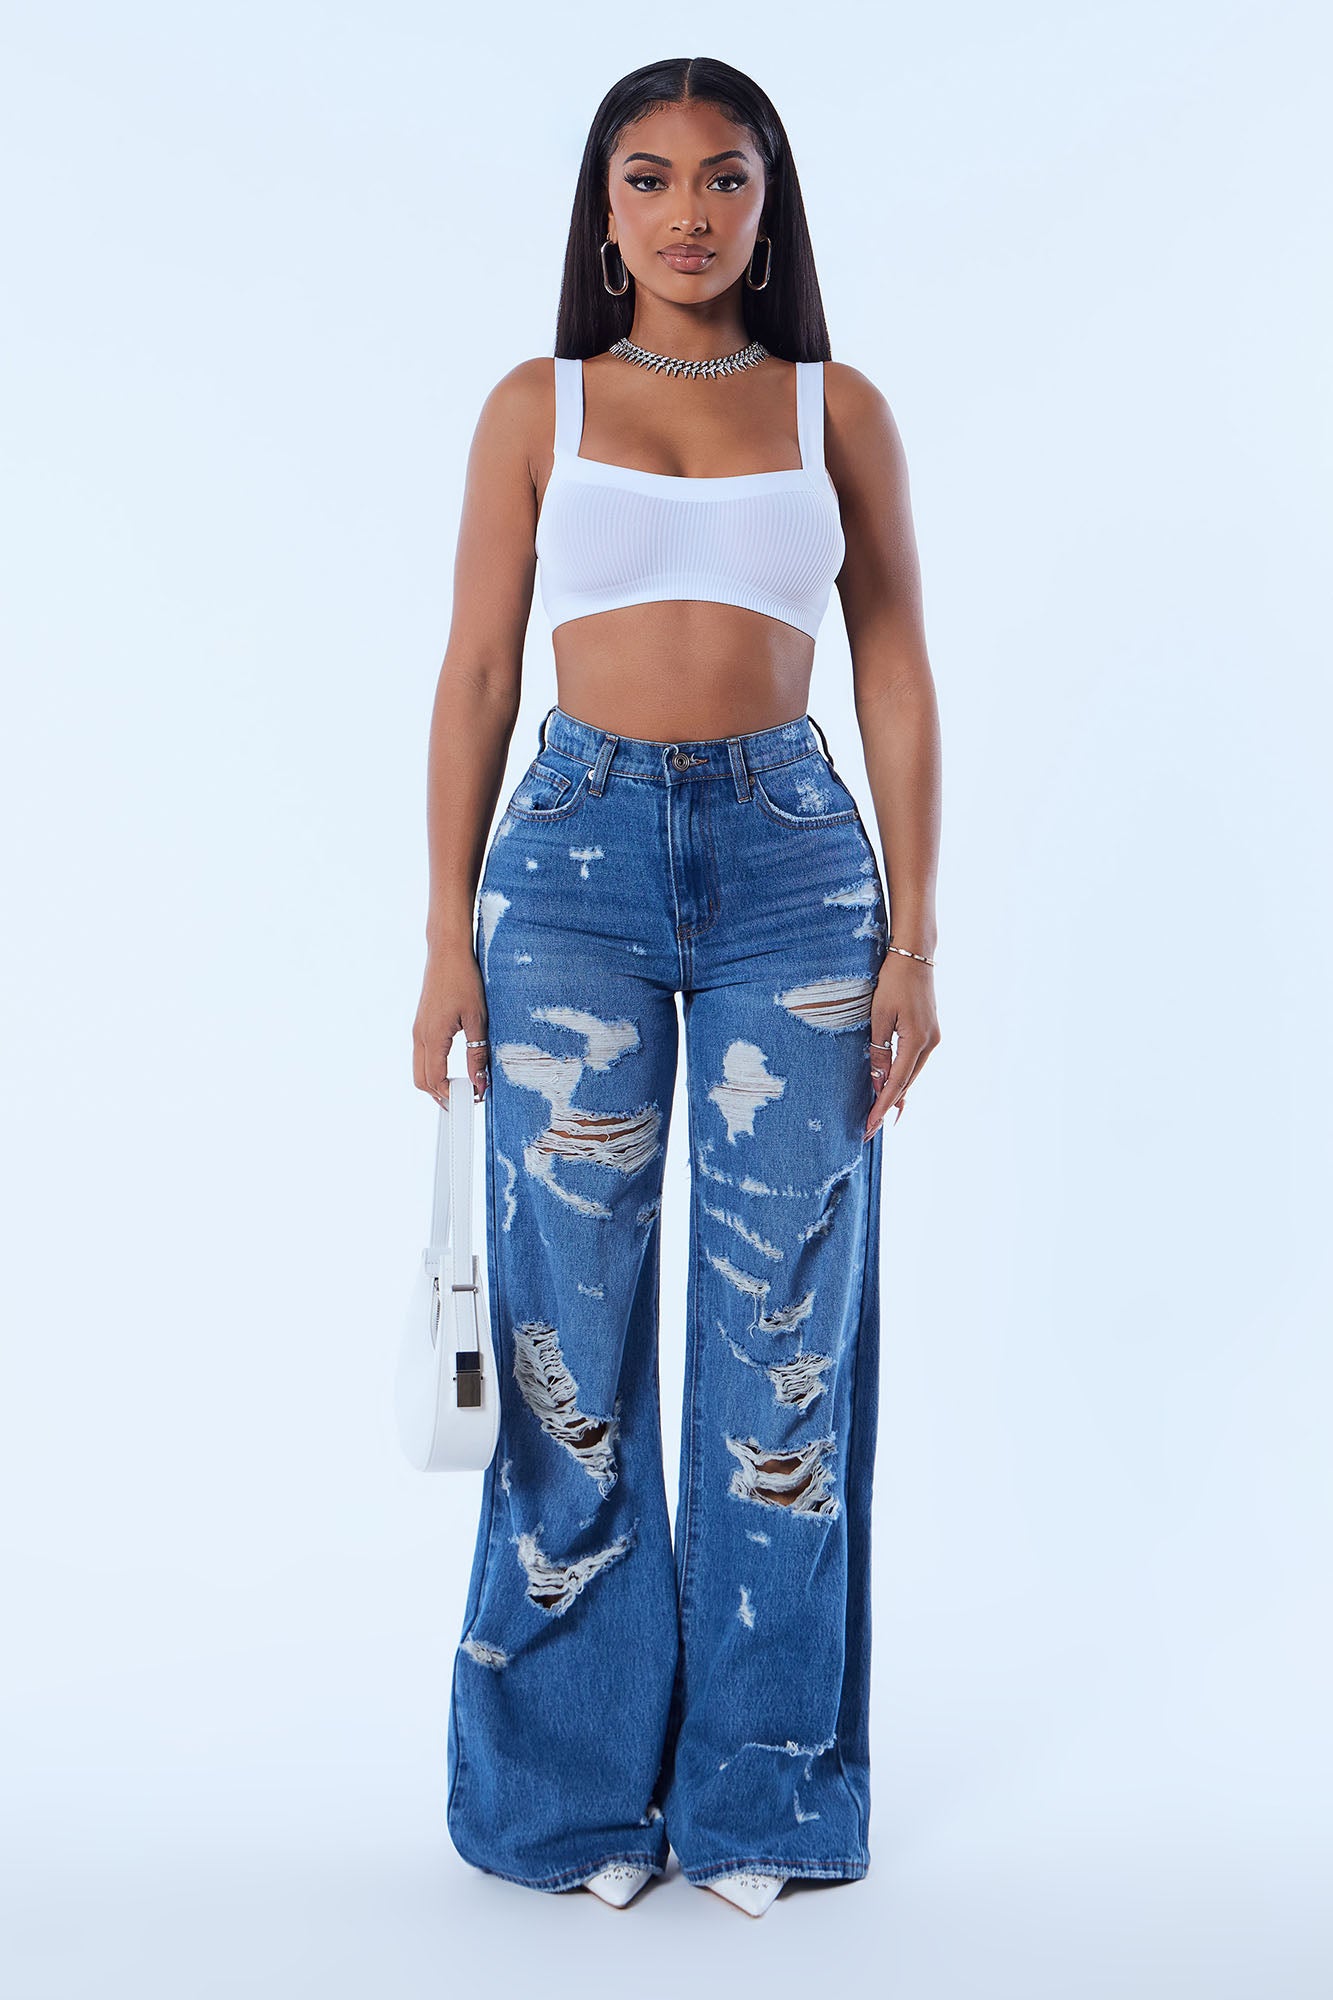 Women's Bell Bottom Jeans High Waisted Wide Leg Stretch Ripped Skinny  Fashion Washed Distressed Destroyed Denim Pants (Dark Blue,Large)